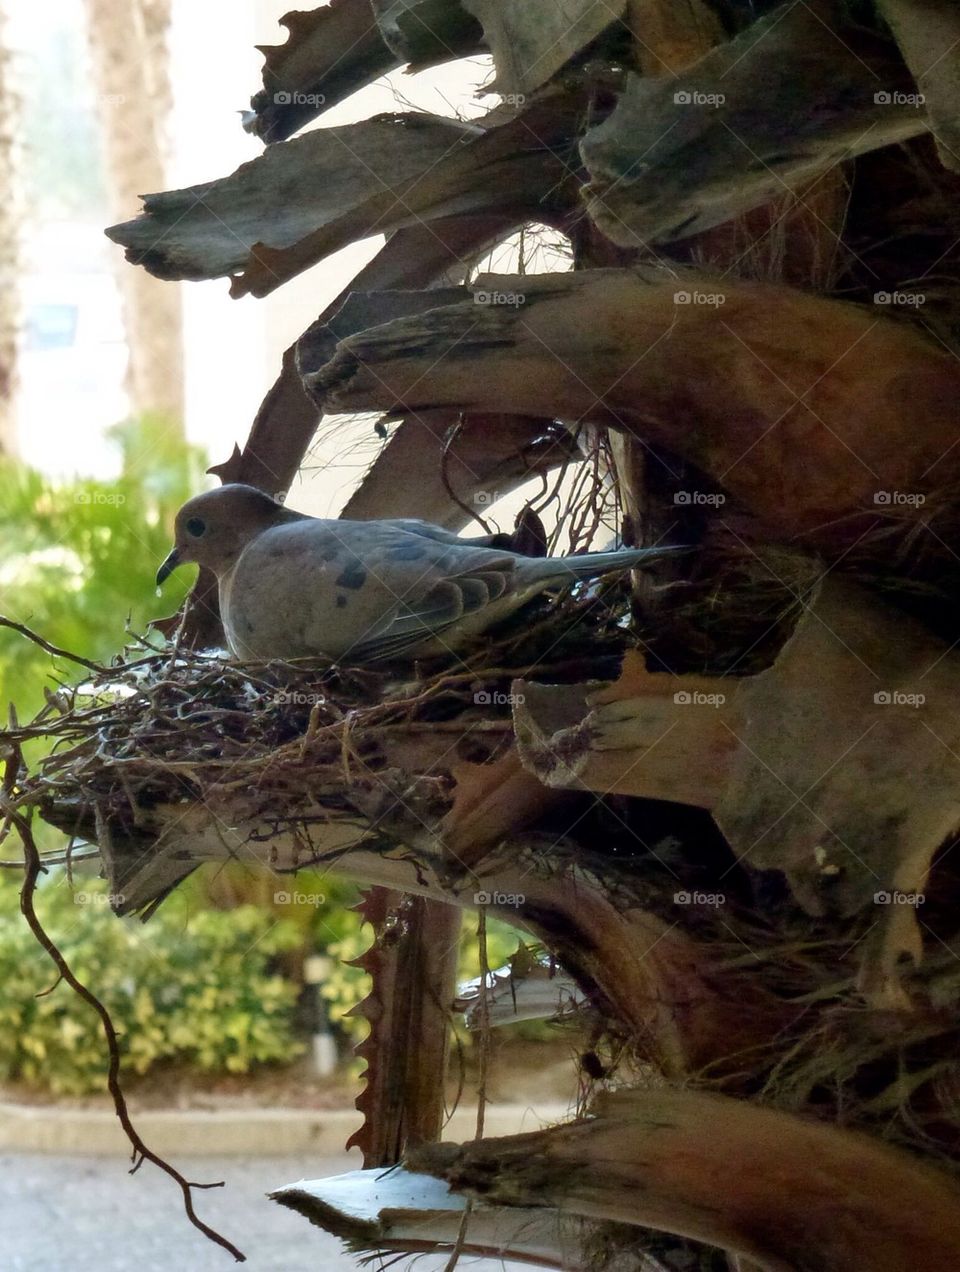 Morning dove nesting. Spring is here. Florida 